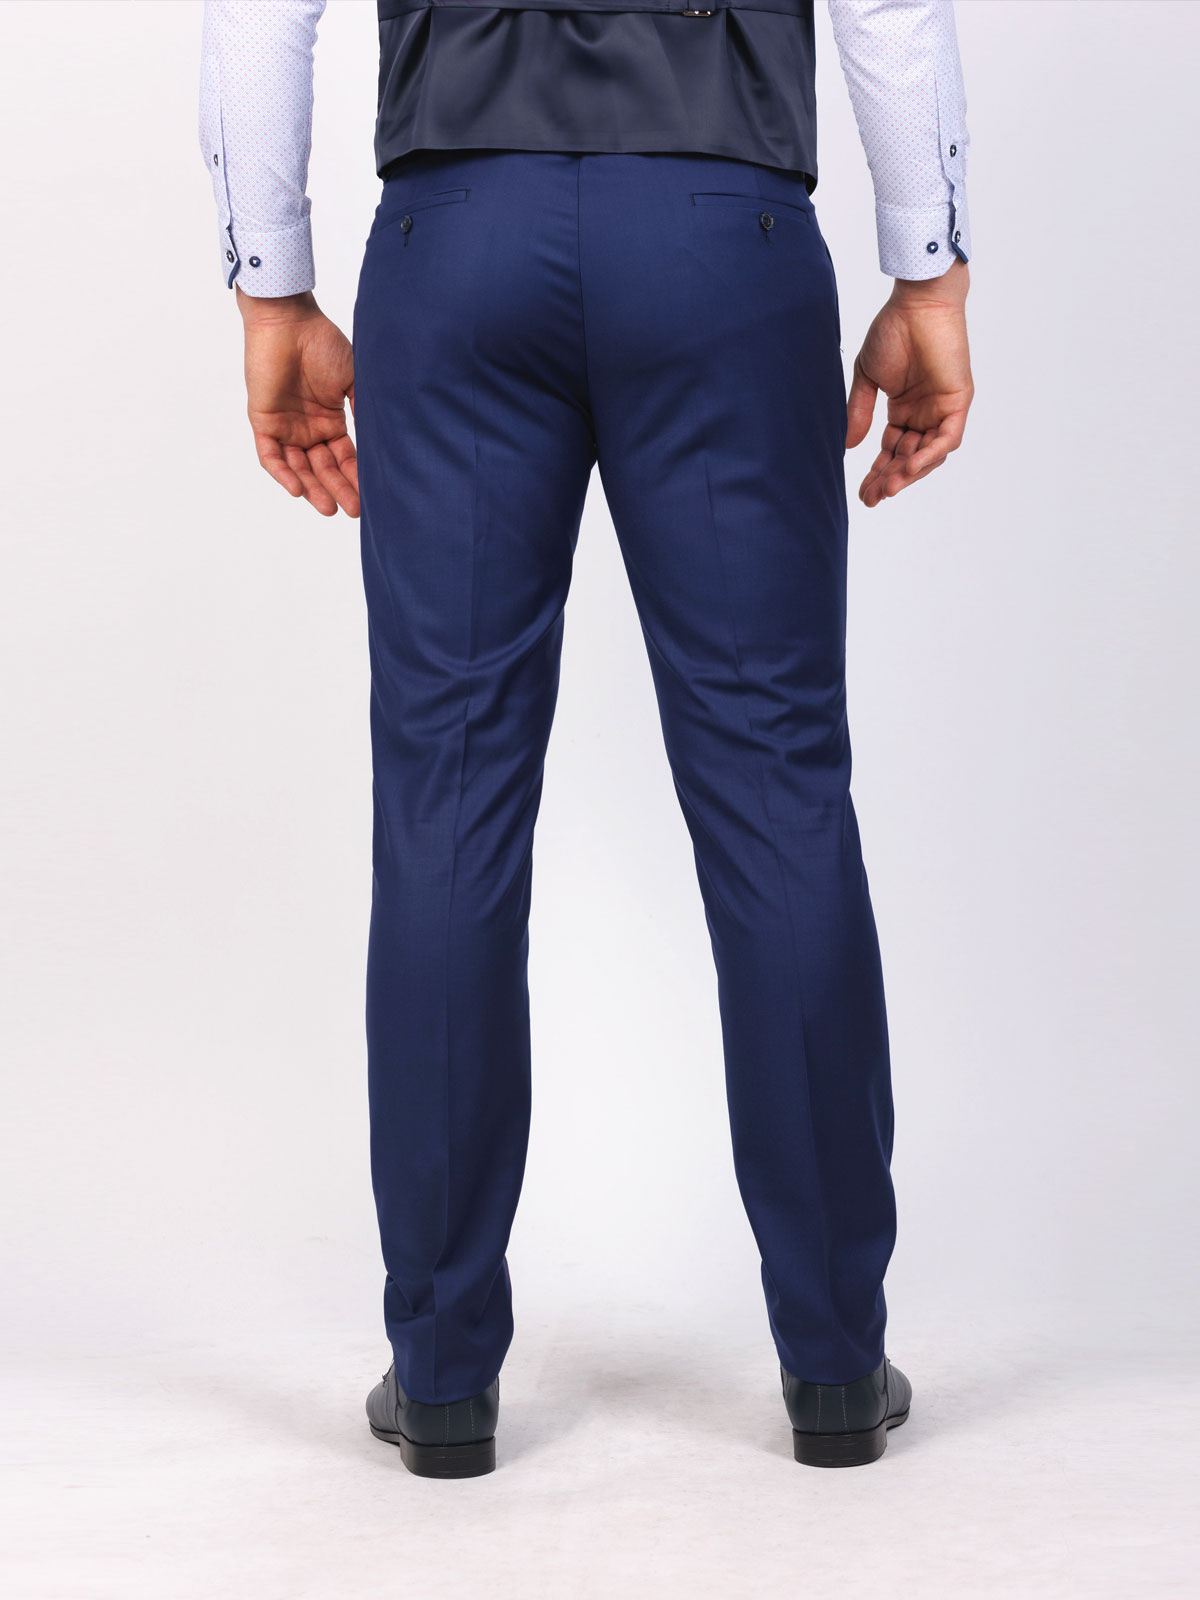 Pants with a fitted cut in blue - 63331 € 60.74 img3